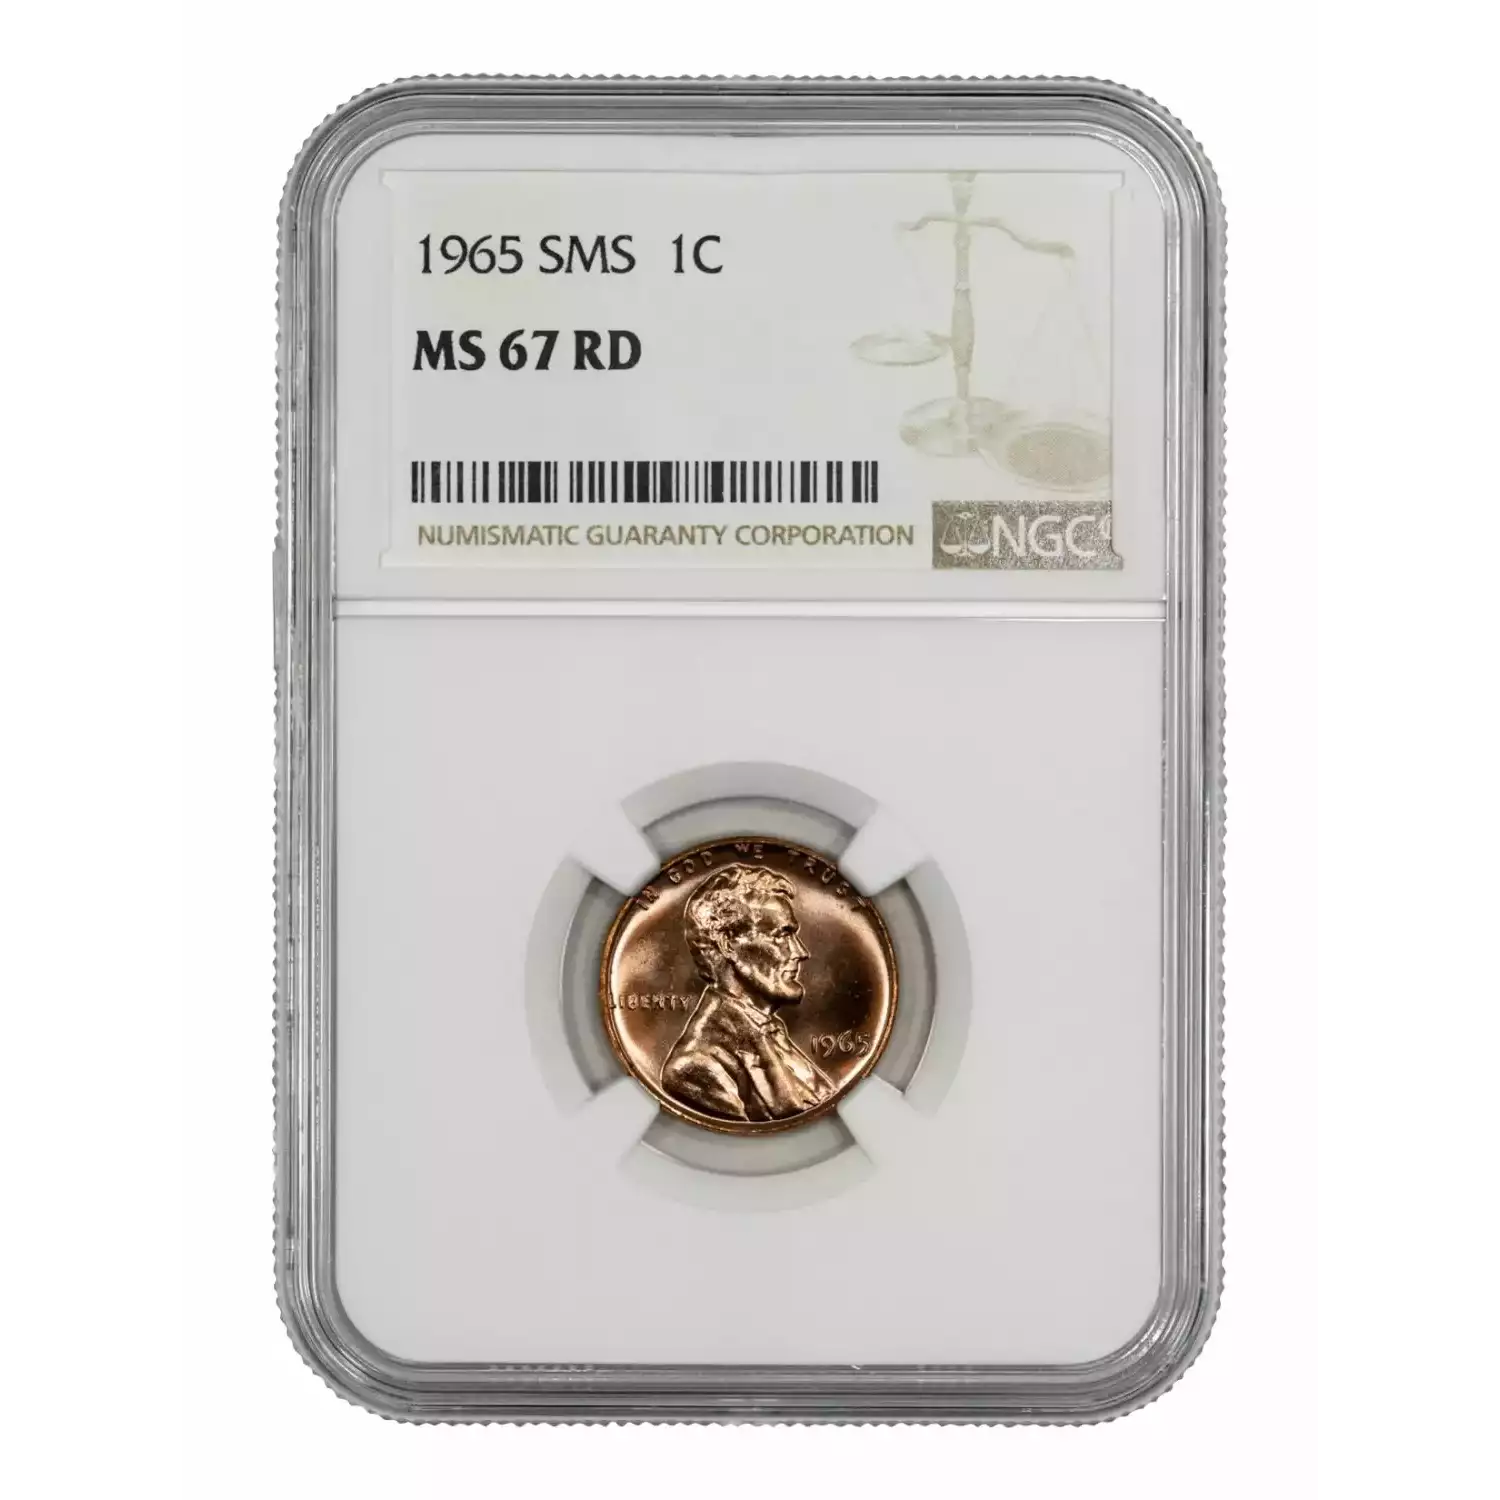 1965 SMS LINCOLN MEMORIAL CENT PENNY 1C NGC CERTIFIED MS 67 RD